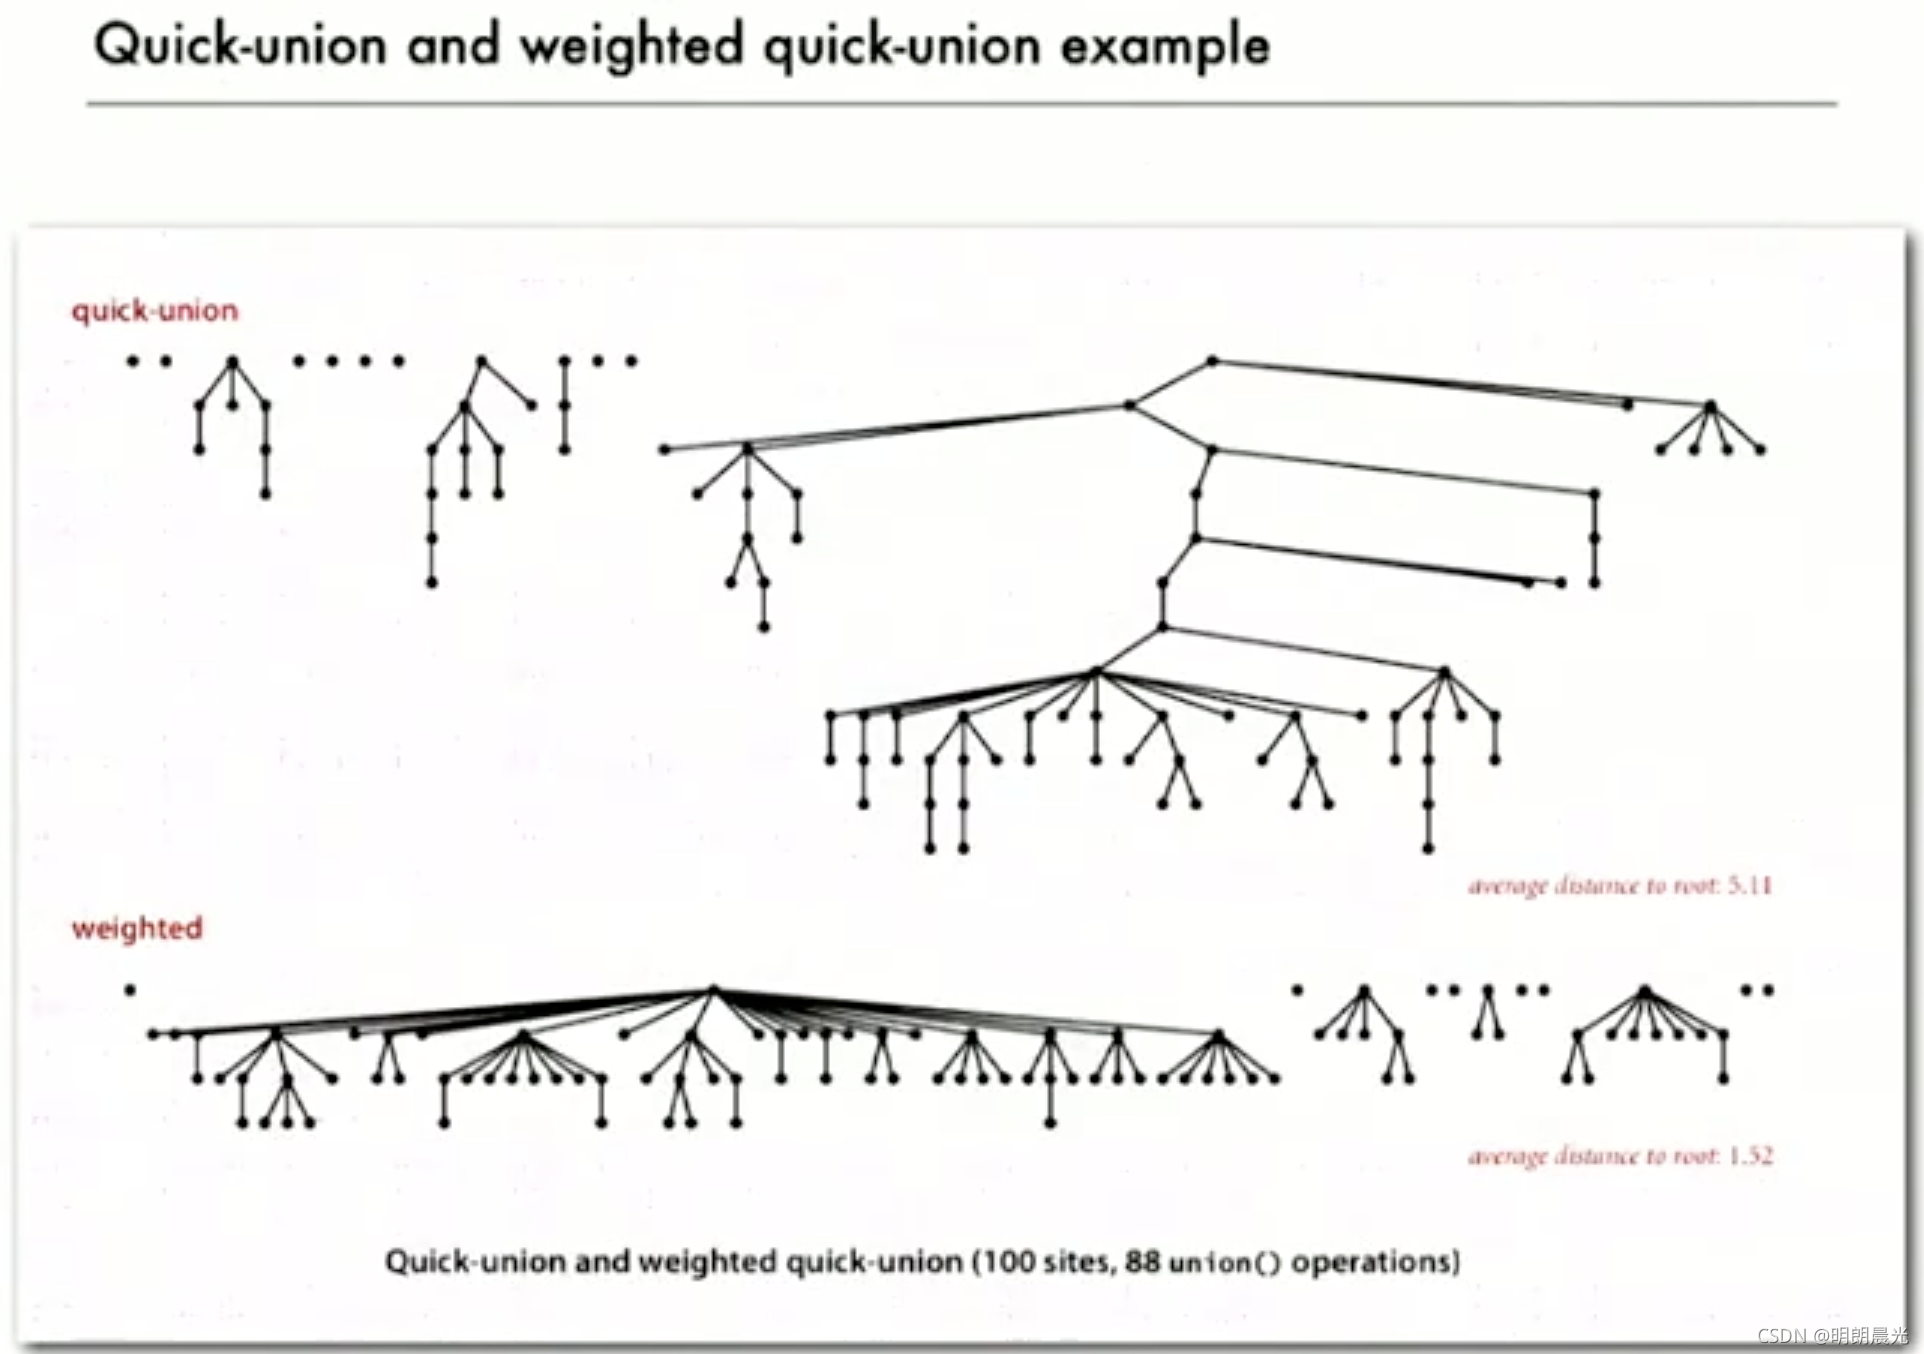 Quick-union and weighted quick-union example